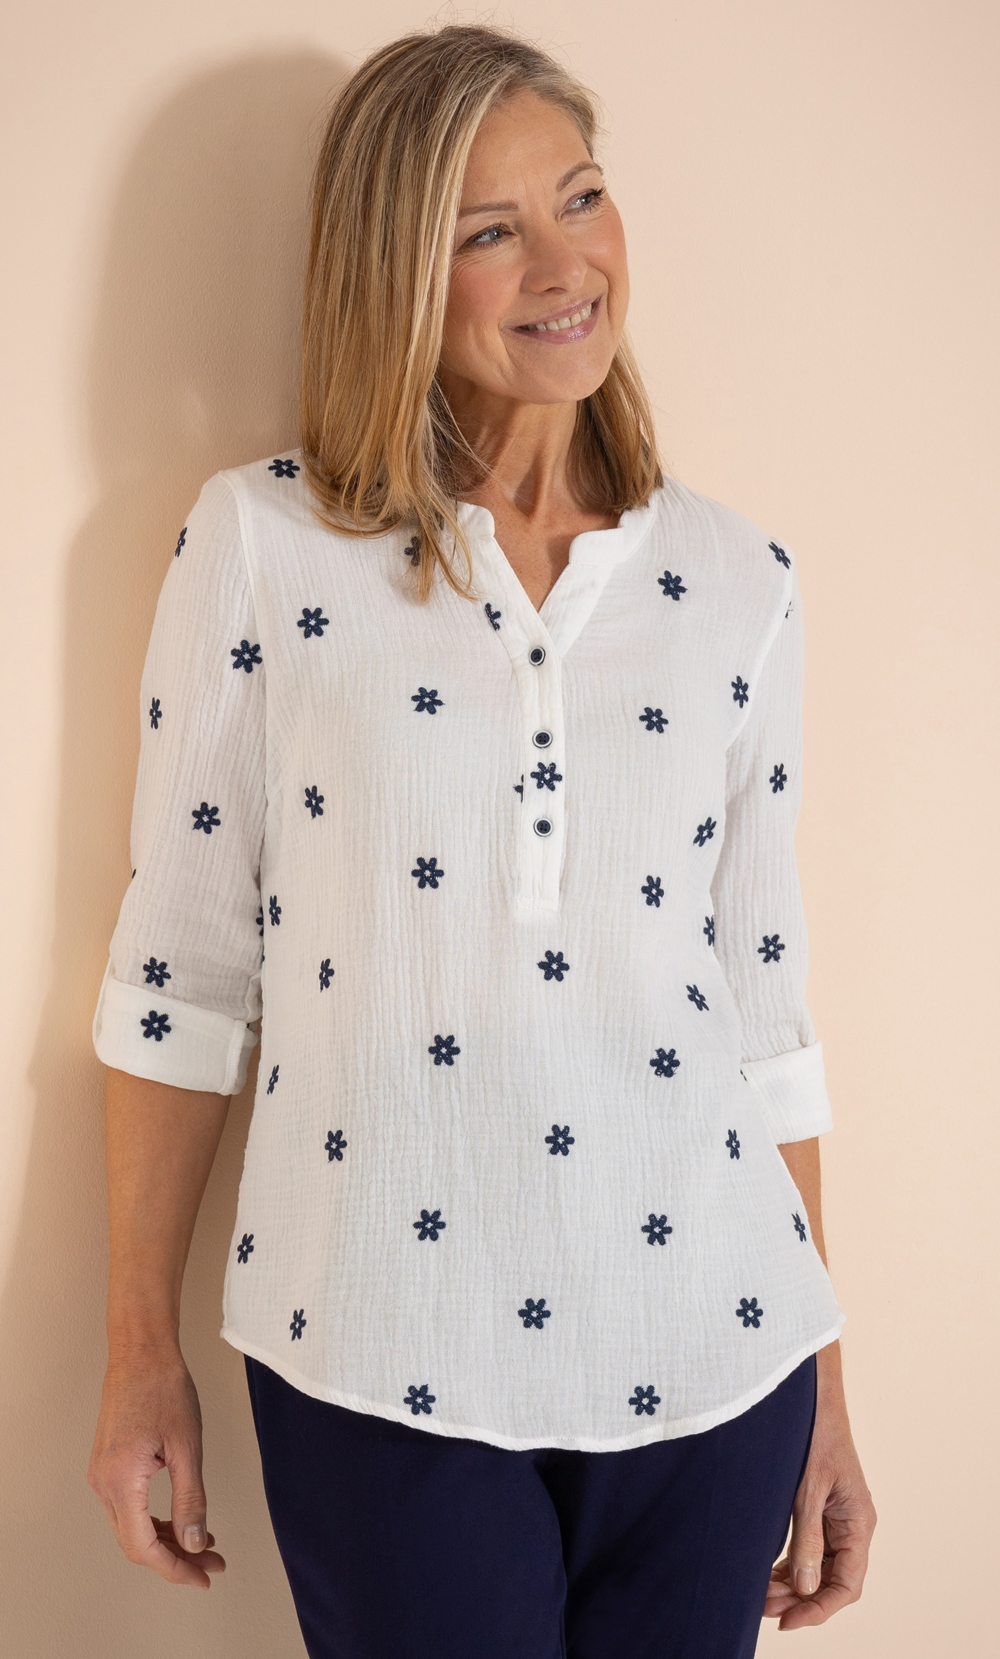 Brands - Anna Rose Anna Rose Embroidered Cotton Top White/Navy Women’s